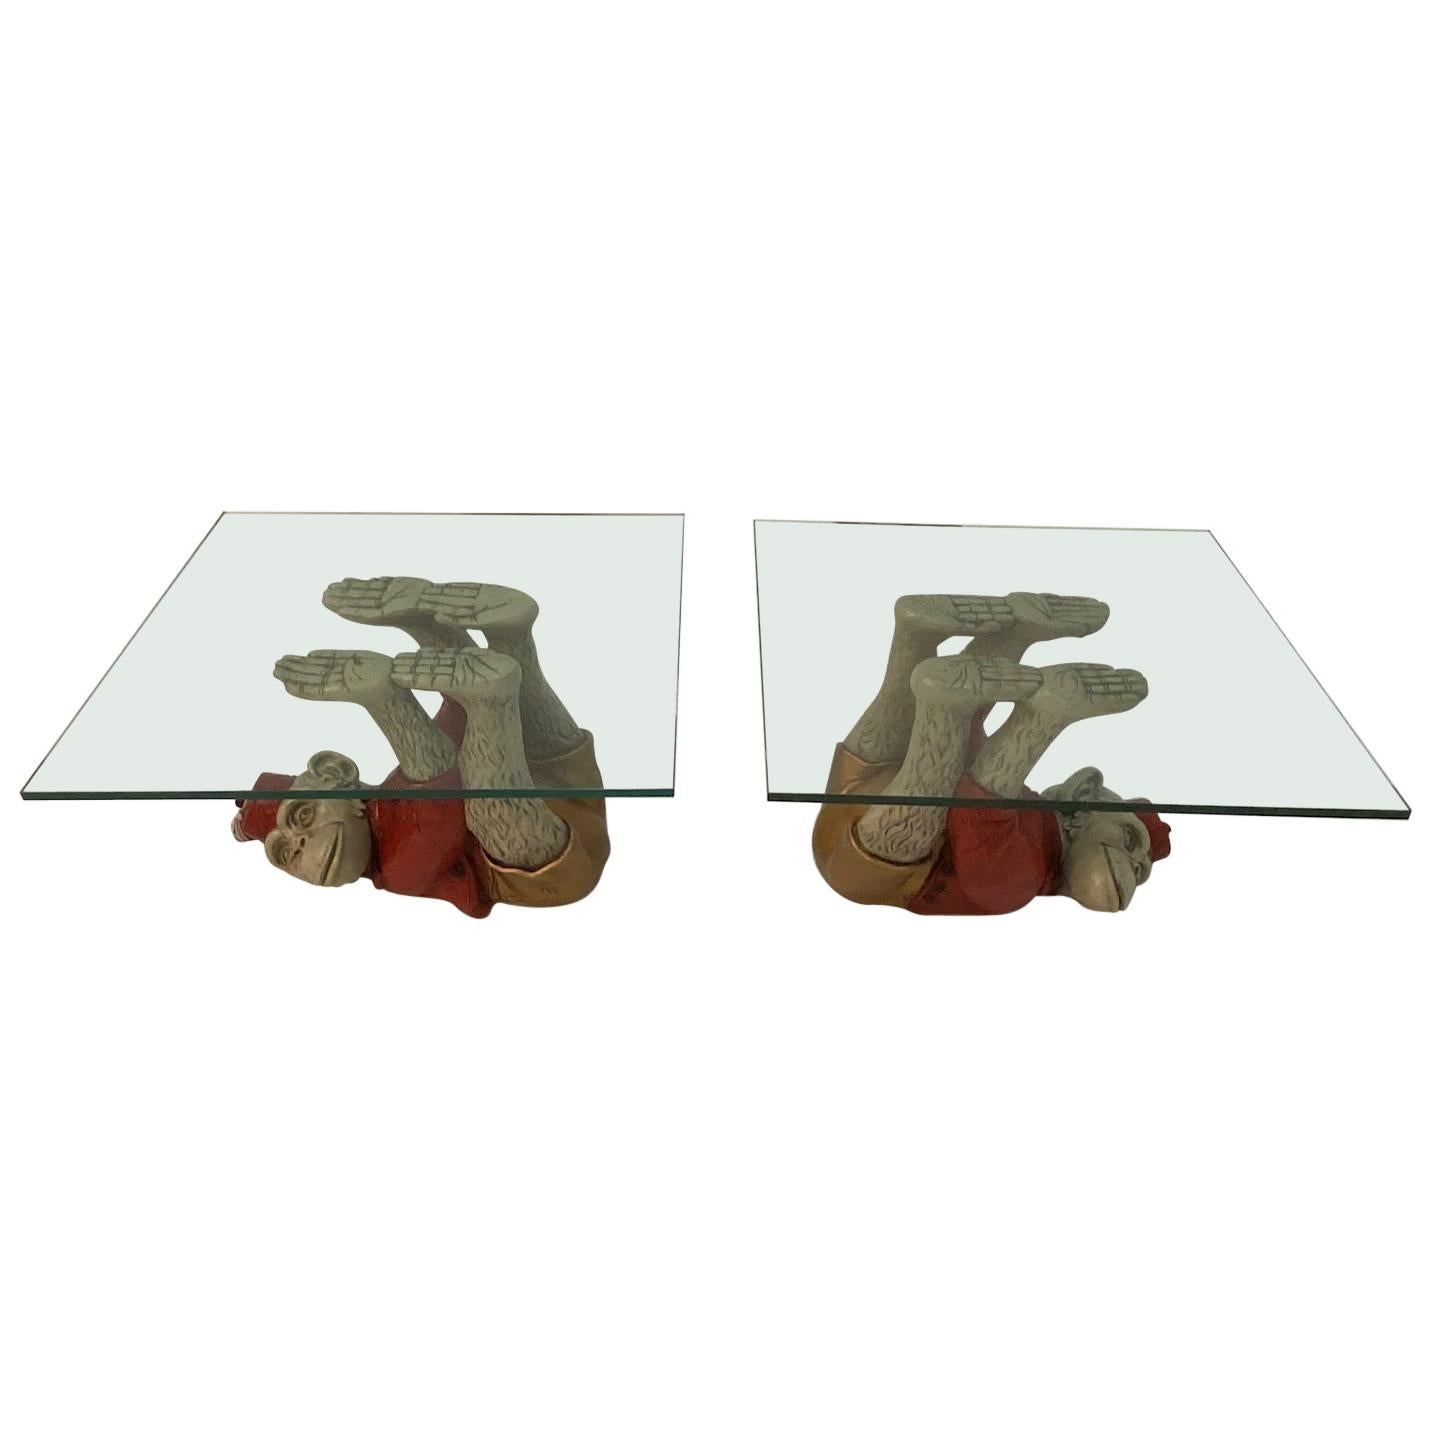 Wonderful Pair of Whimsical Monkey Motife End Tables Coffee Table For Sale